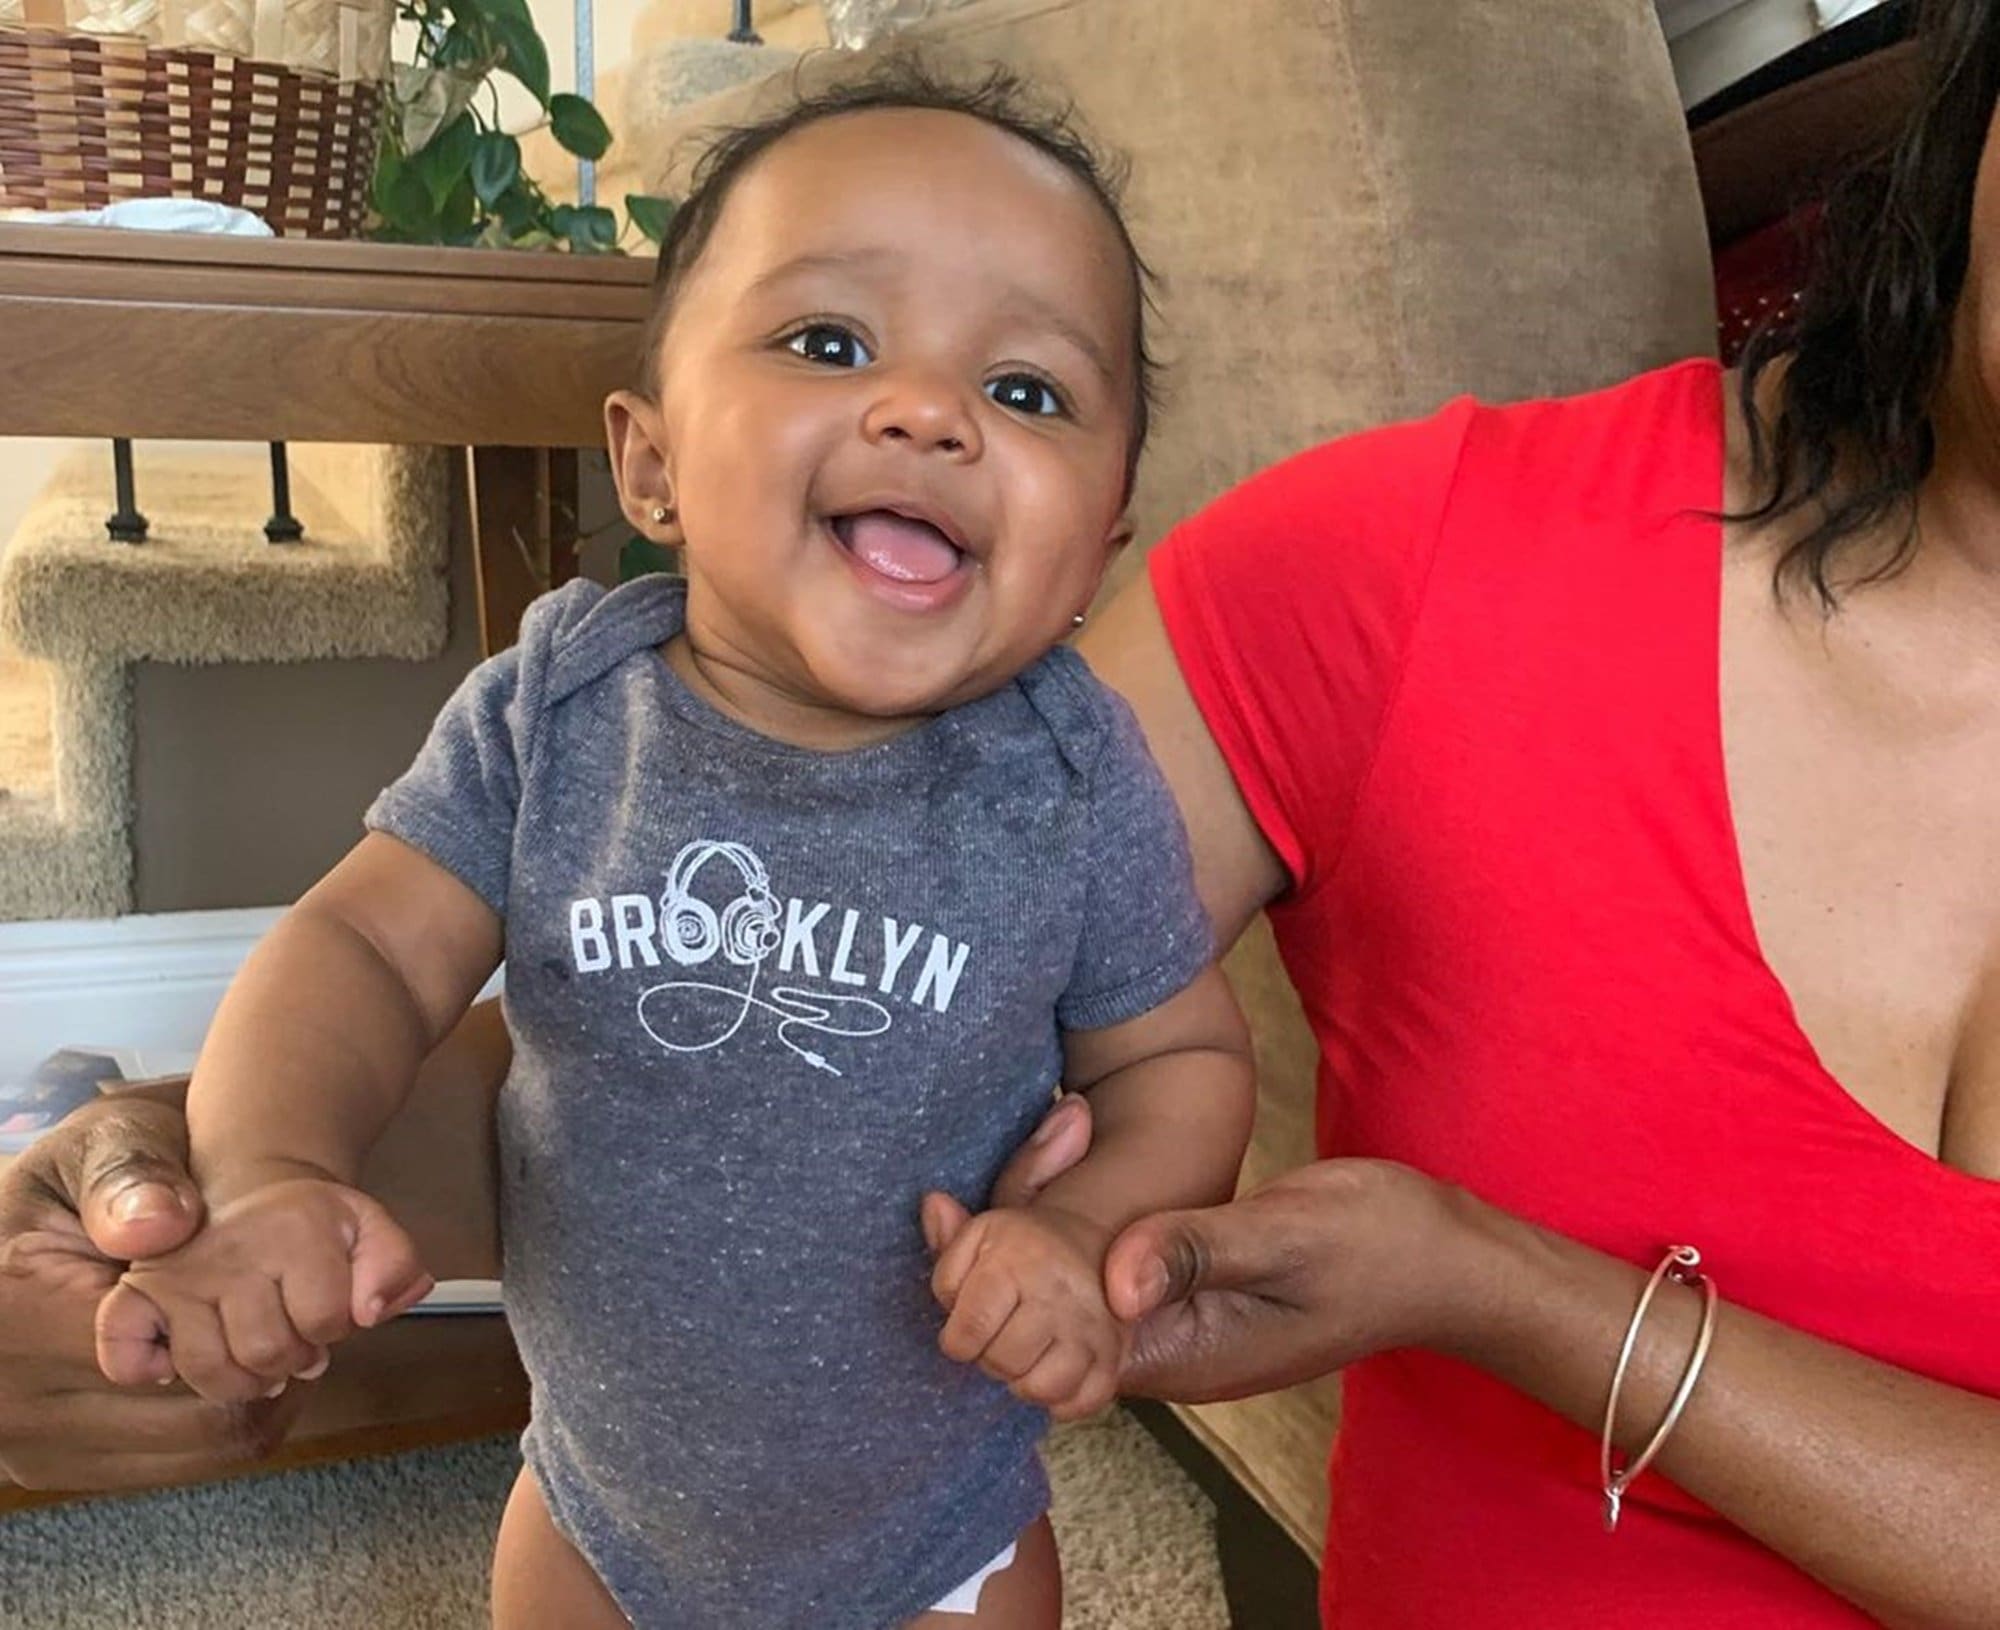 Kenya Moore's Daughter Brooklyn Daly Has The Best Time At Kandi Burruss' Son, Ace Wells Tucker's Birthday Party - See The Sweet Photo